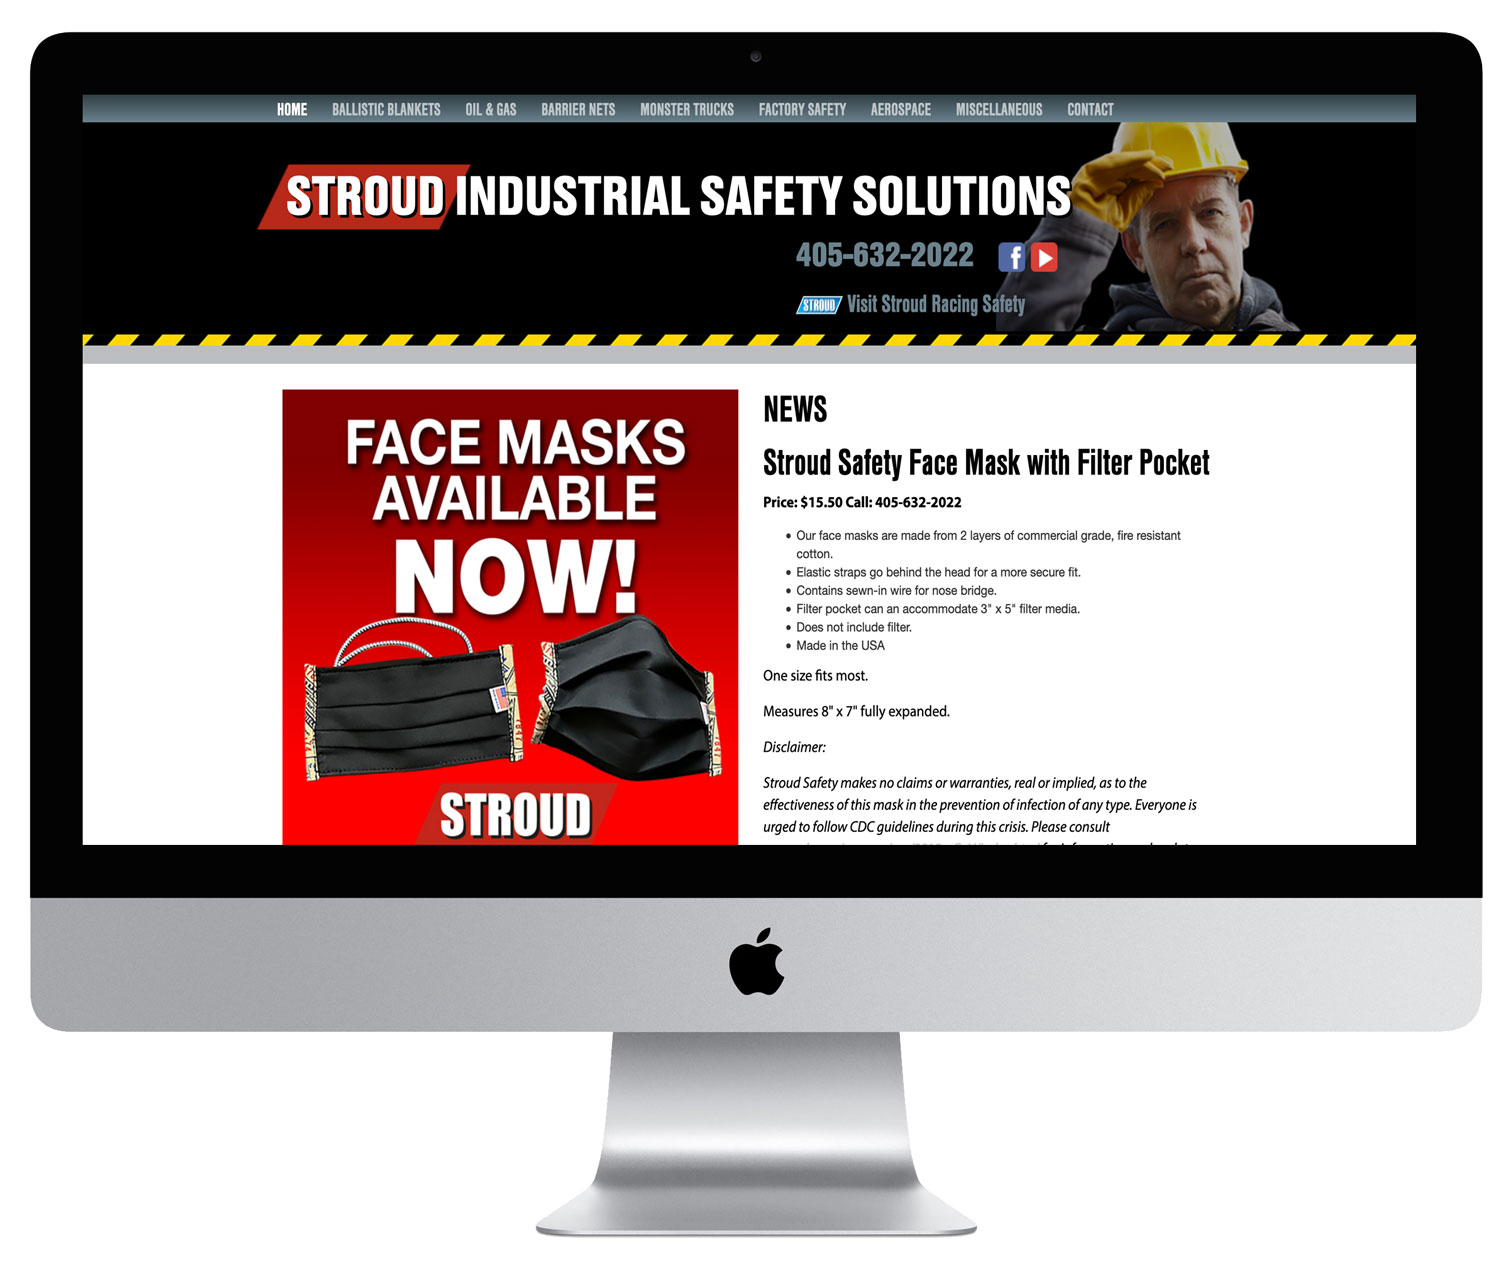 Stroud Industrial Safety Solutions website